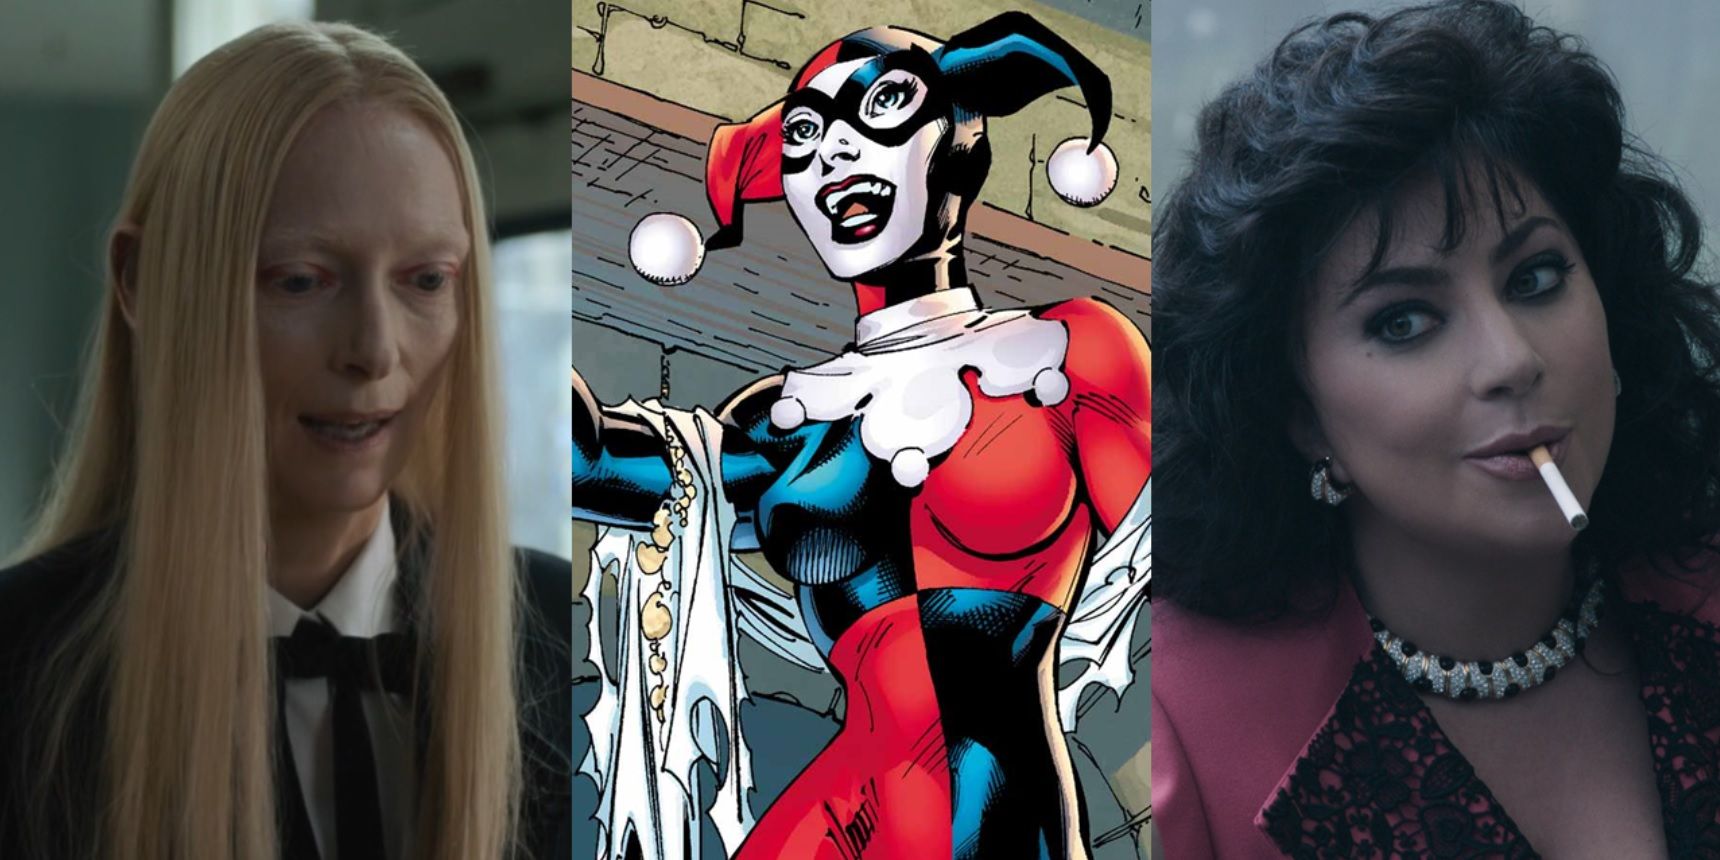 Split image of Tilda Swinton in The Dead Don't Die, Harley Quinn in DC comics, and Lady Gaga in House of Gucci